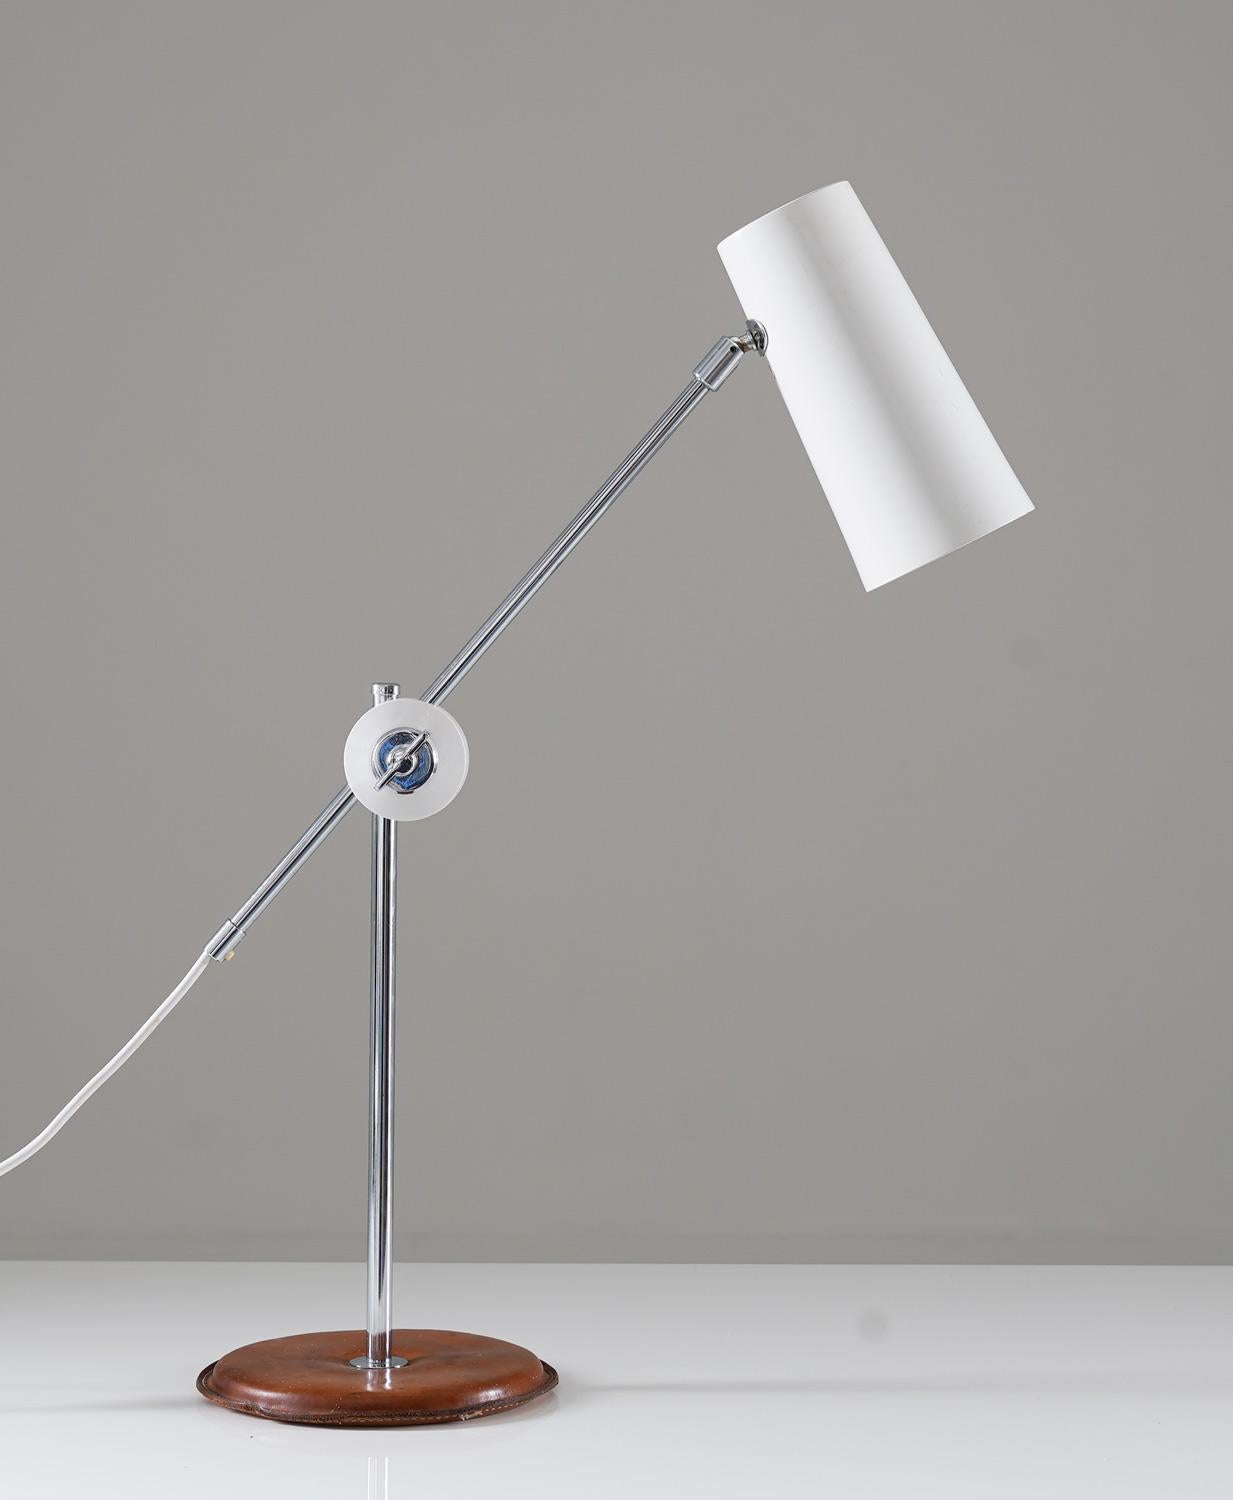 This beautiful table lamp was manufactured by Ateljé Lyktan in Sweden in the 1960s. Its unique design features adjustable chrome rods, making the lamp extremely flexible. This lamp is in good original condition, with patina and stains on the